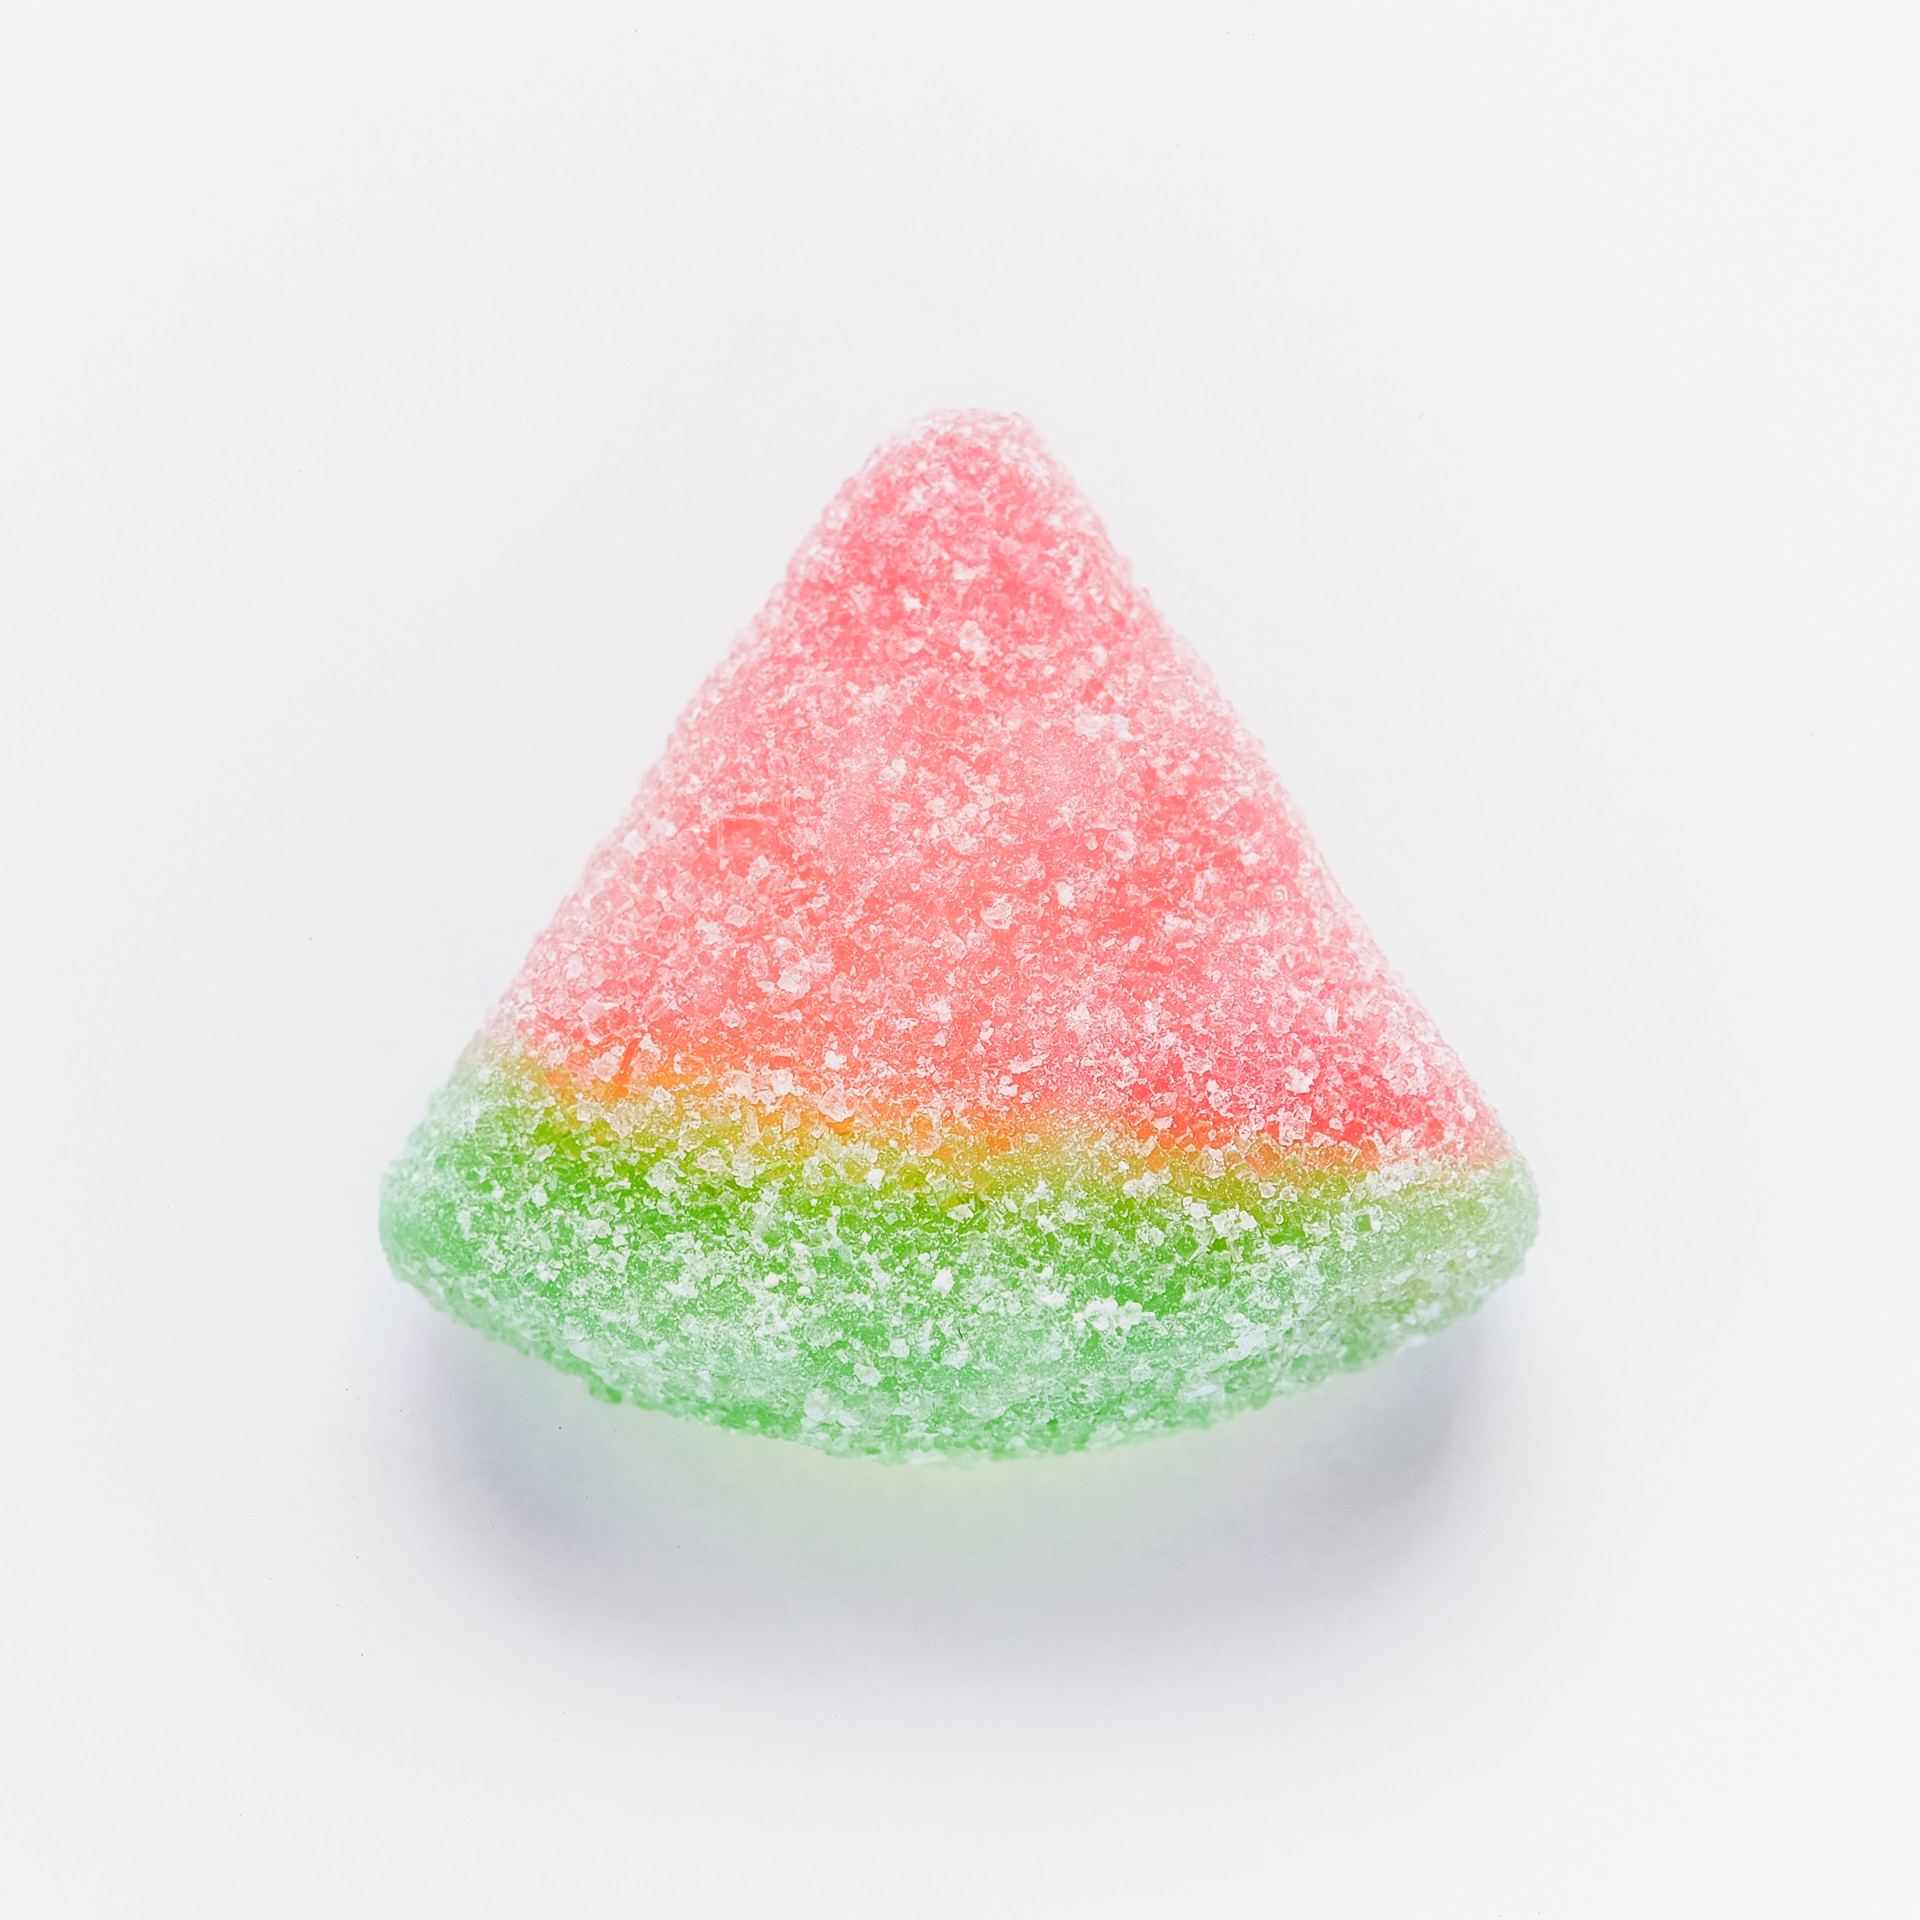 Sour Watermelon by Peter Andrew Lusztyk / Refined Sugar